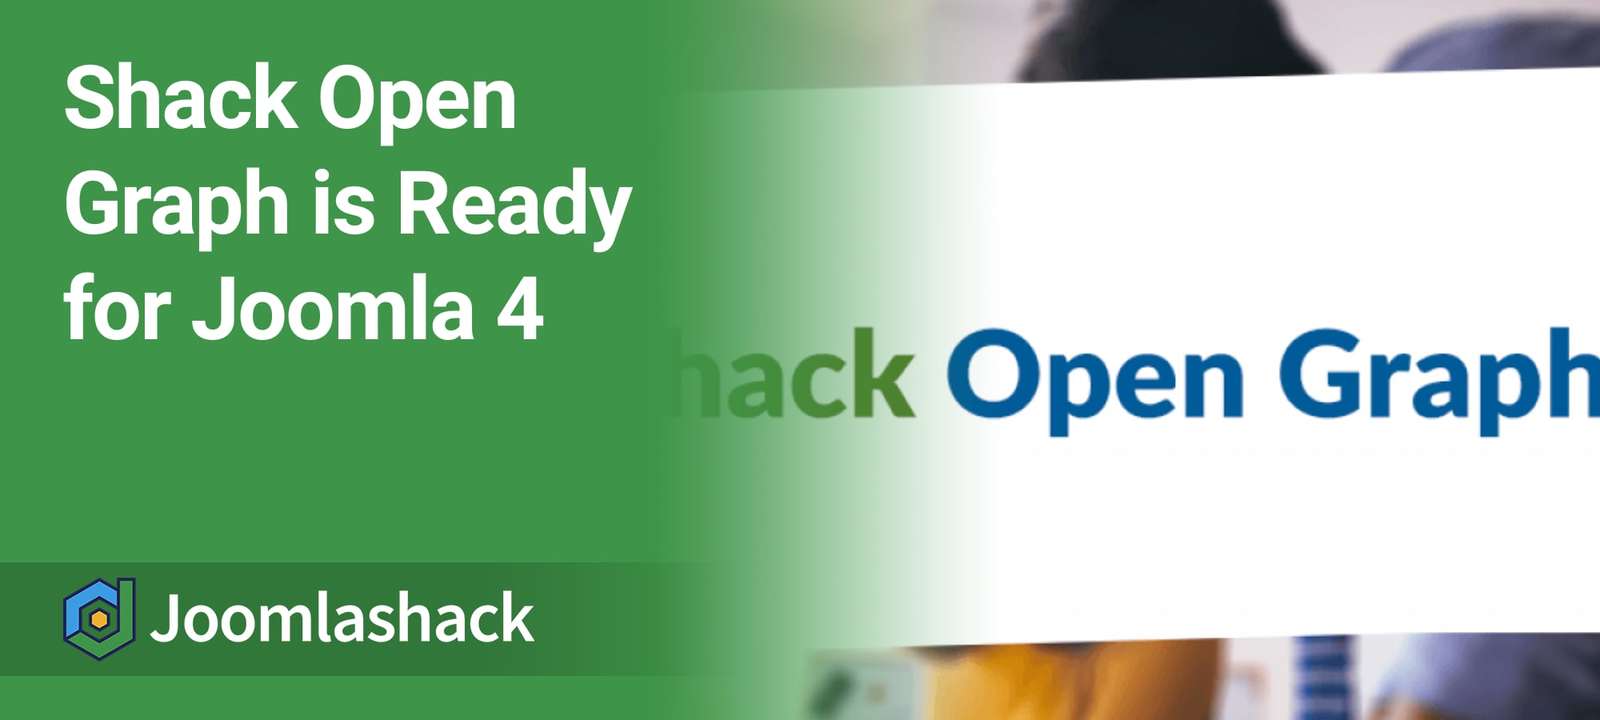 Shack Open Graph is Ready for Joomla 4